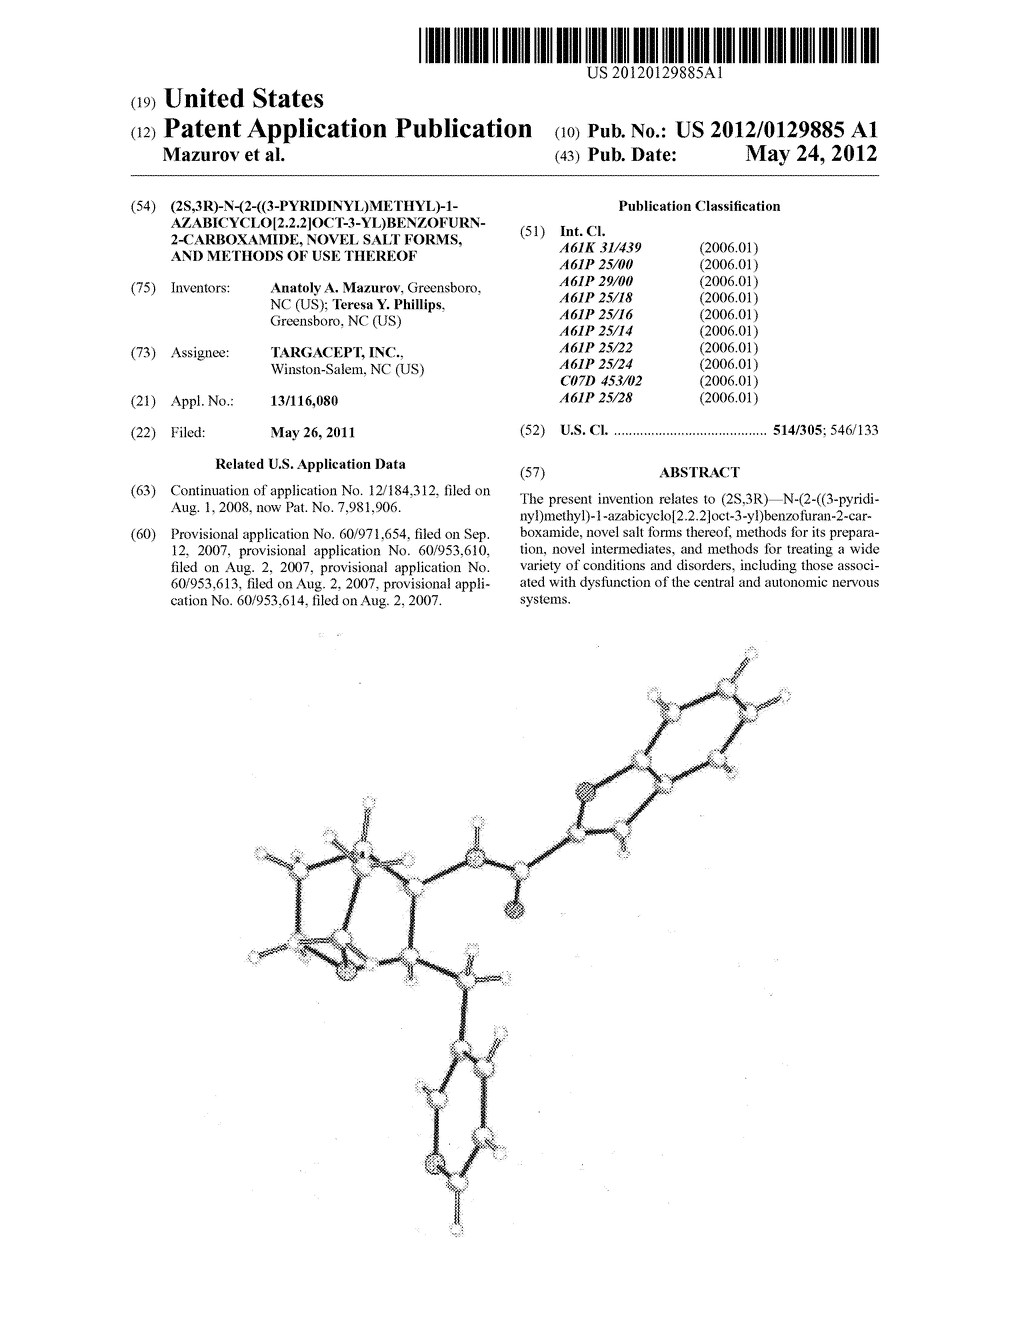 (2S,3R)-N-(2-((3-PYRIDINYL)METHYL)-1-AZABICYCLO[2.2.2]OCT-3-YL)BENZOFURN-2-    -CARBOXAMIDE, NOVEL SALT FORMS, AND METHODS OF USE THEREOF - diagram, schematic, and image 01